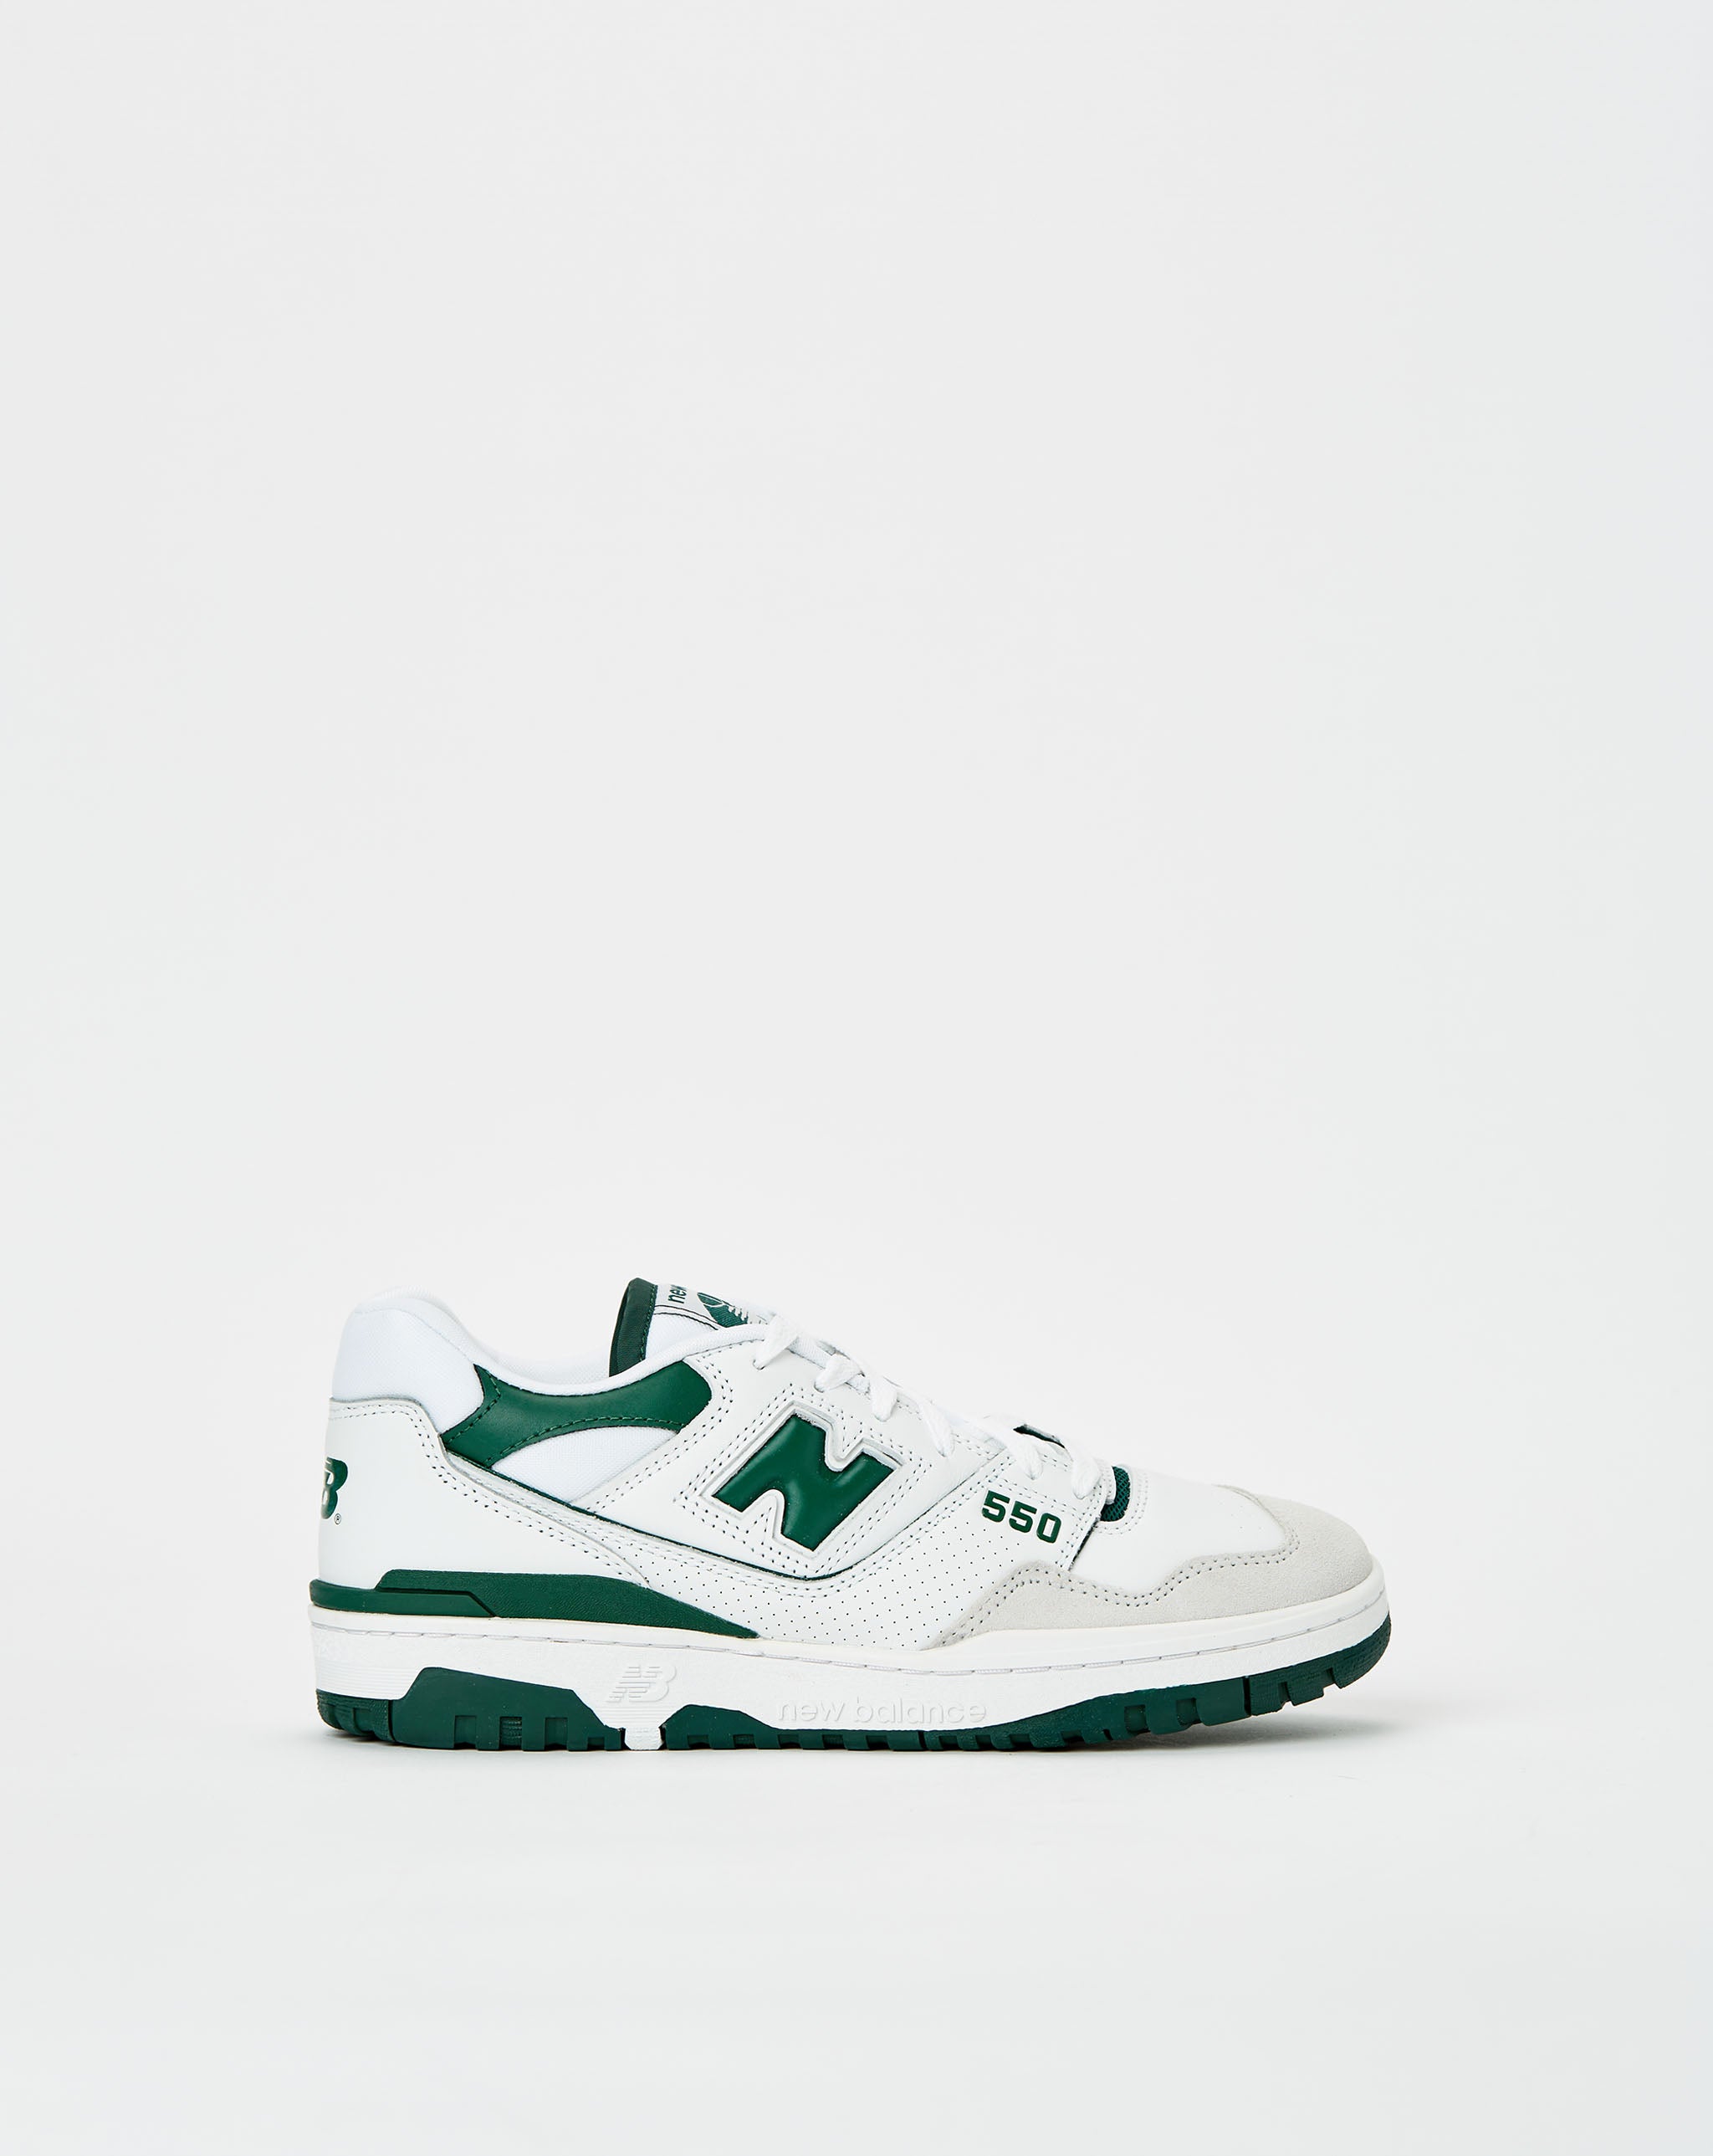 New Balance - 550 - White | Green - BB550WT1 – Rule of Next